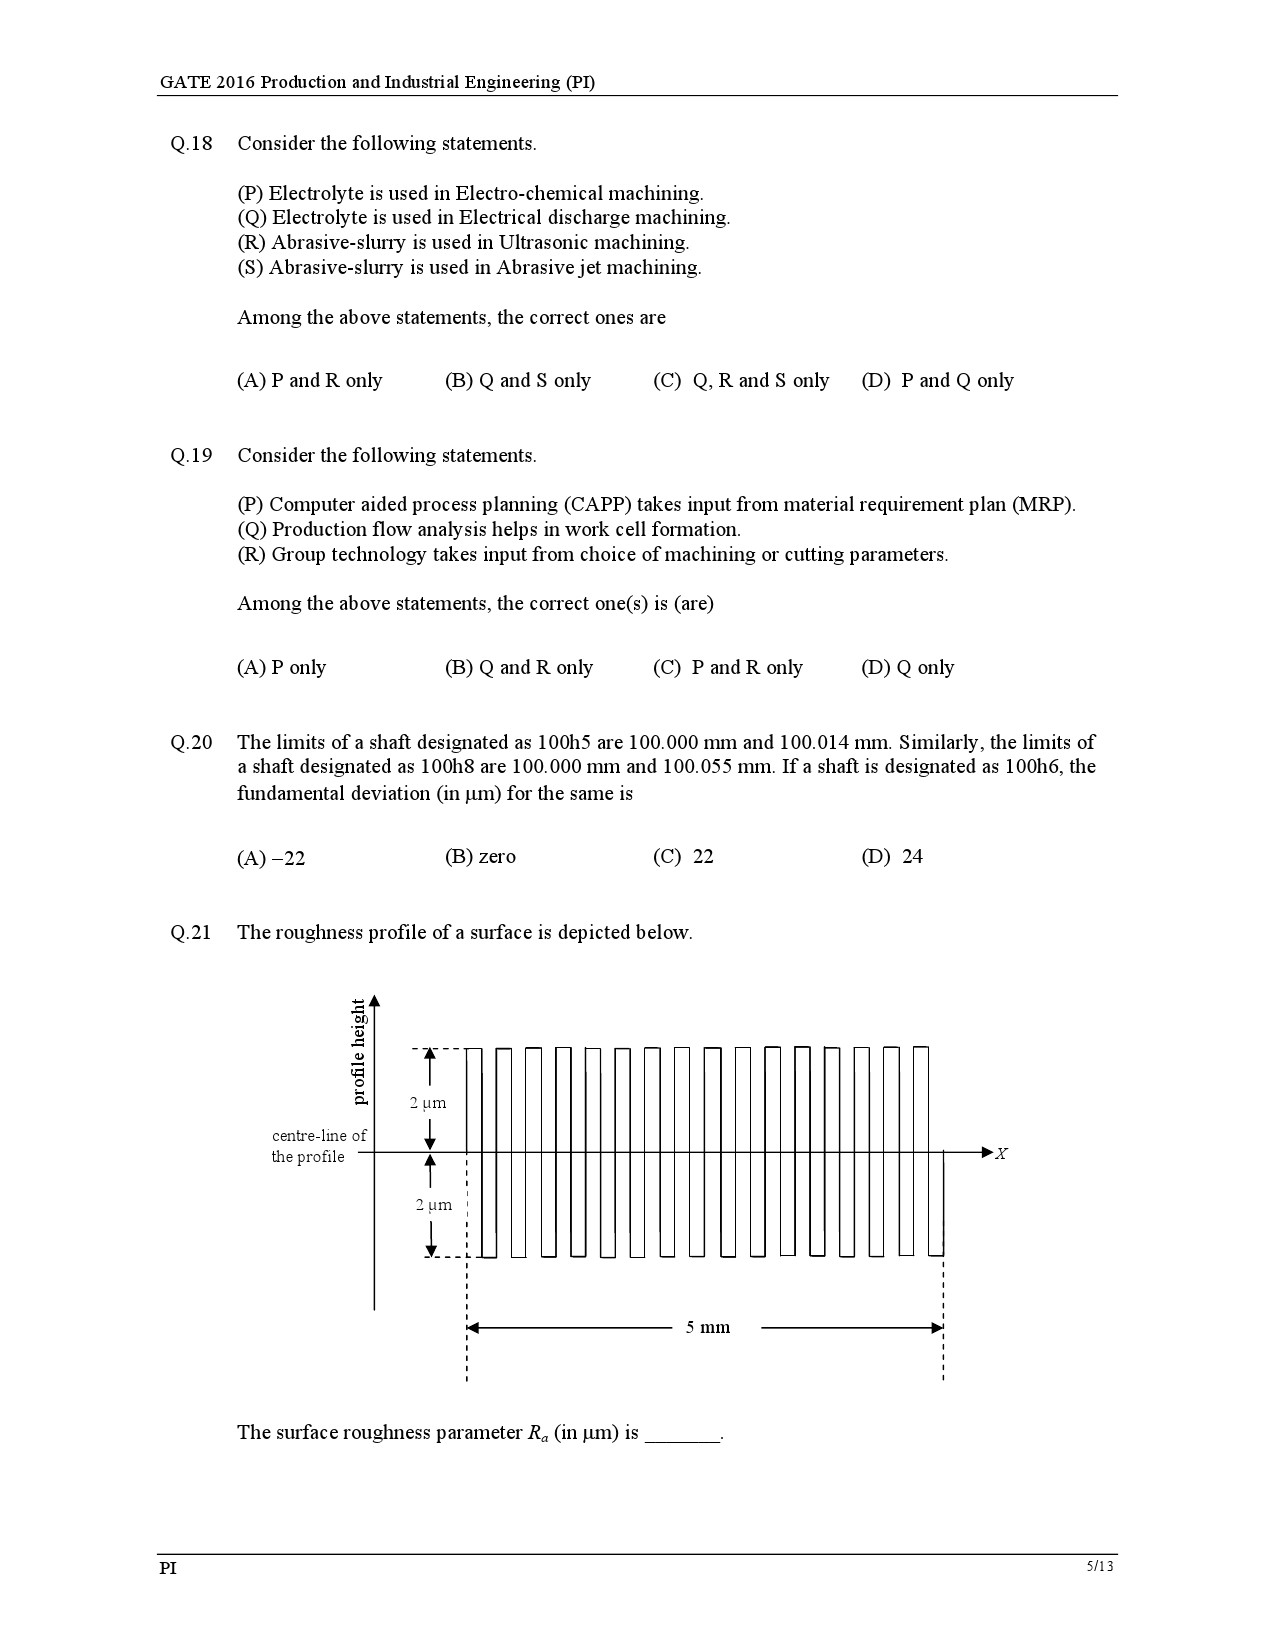 GATE Exam Question Paper 2016 Production and Industrial Engineering 8